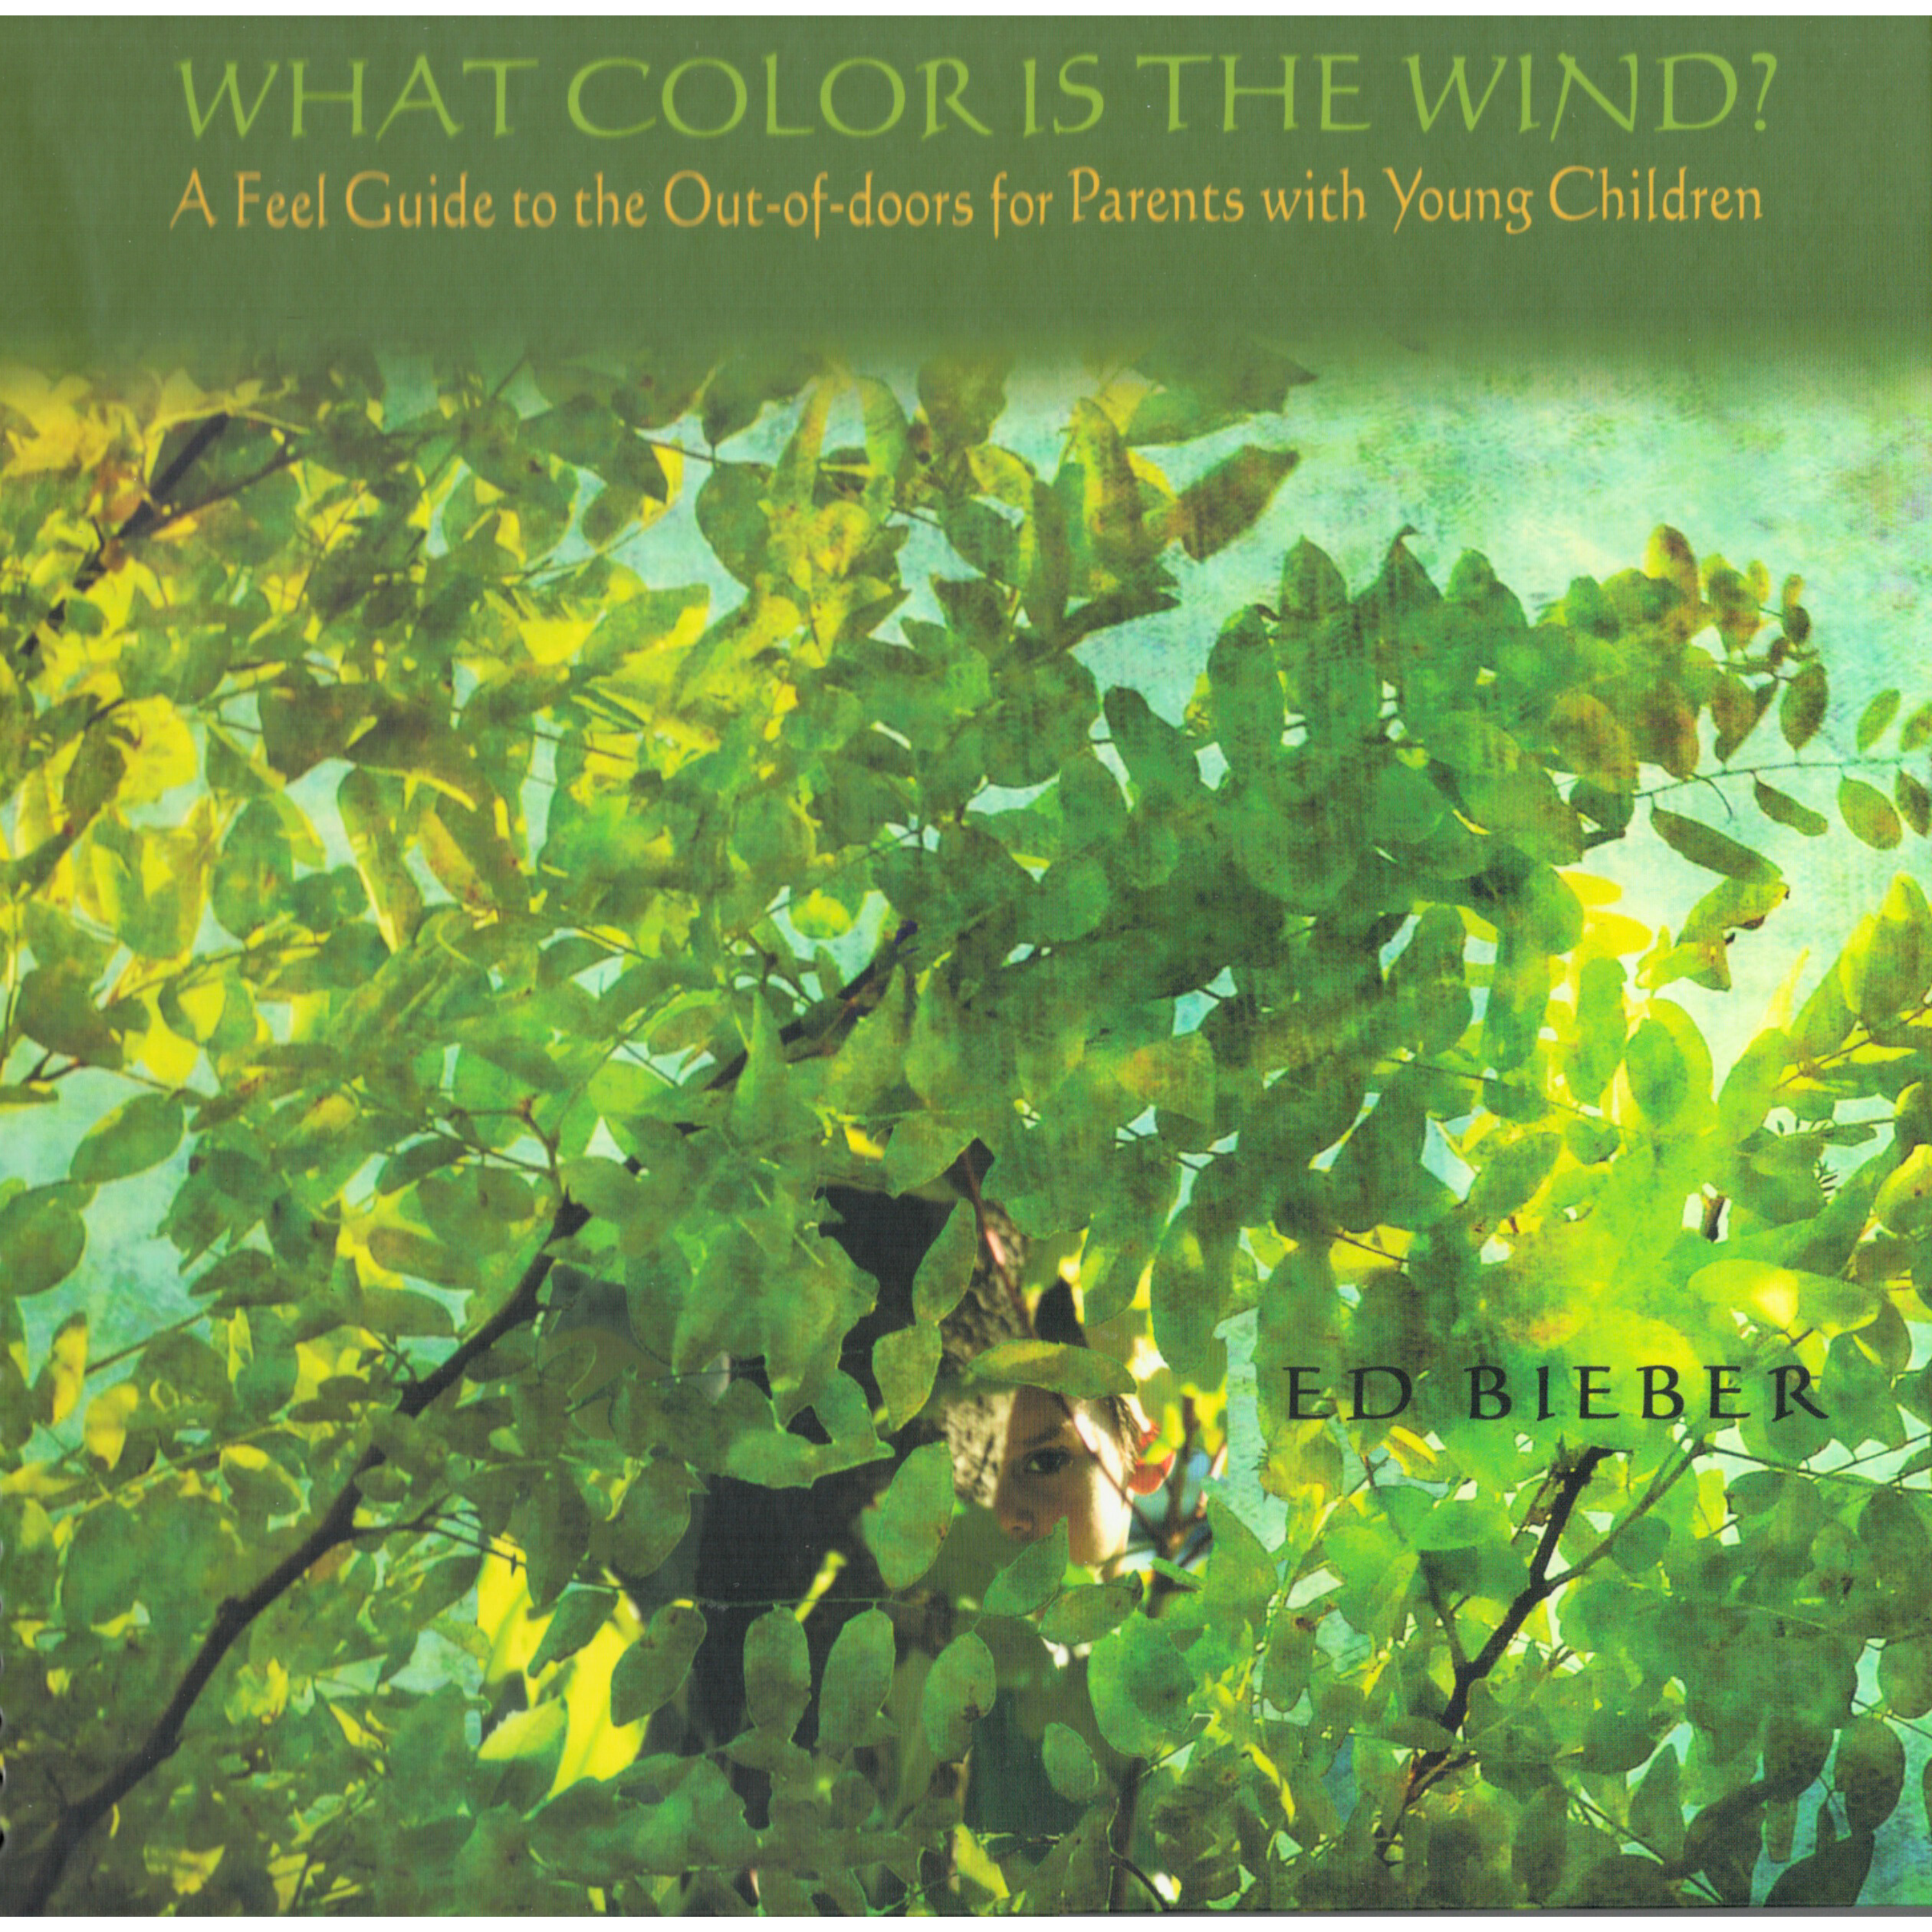 What Color Is the Wind?